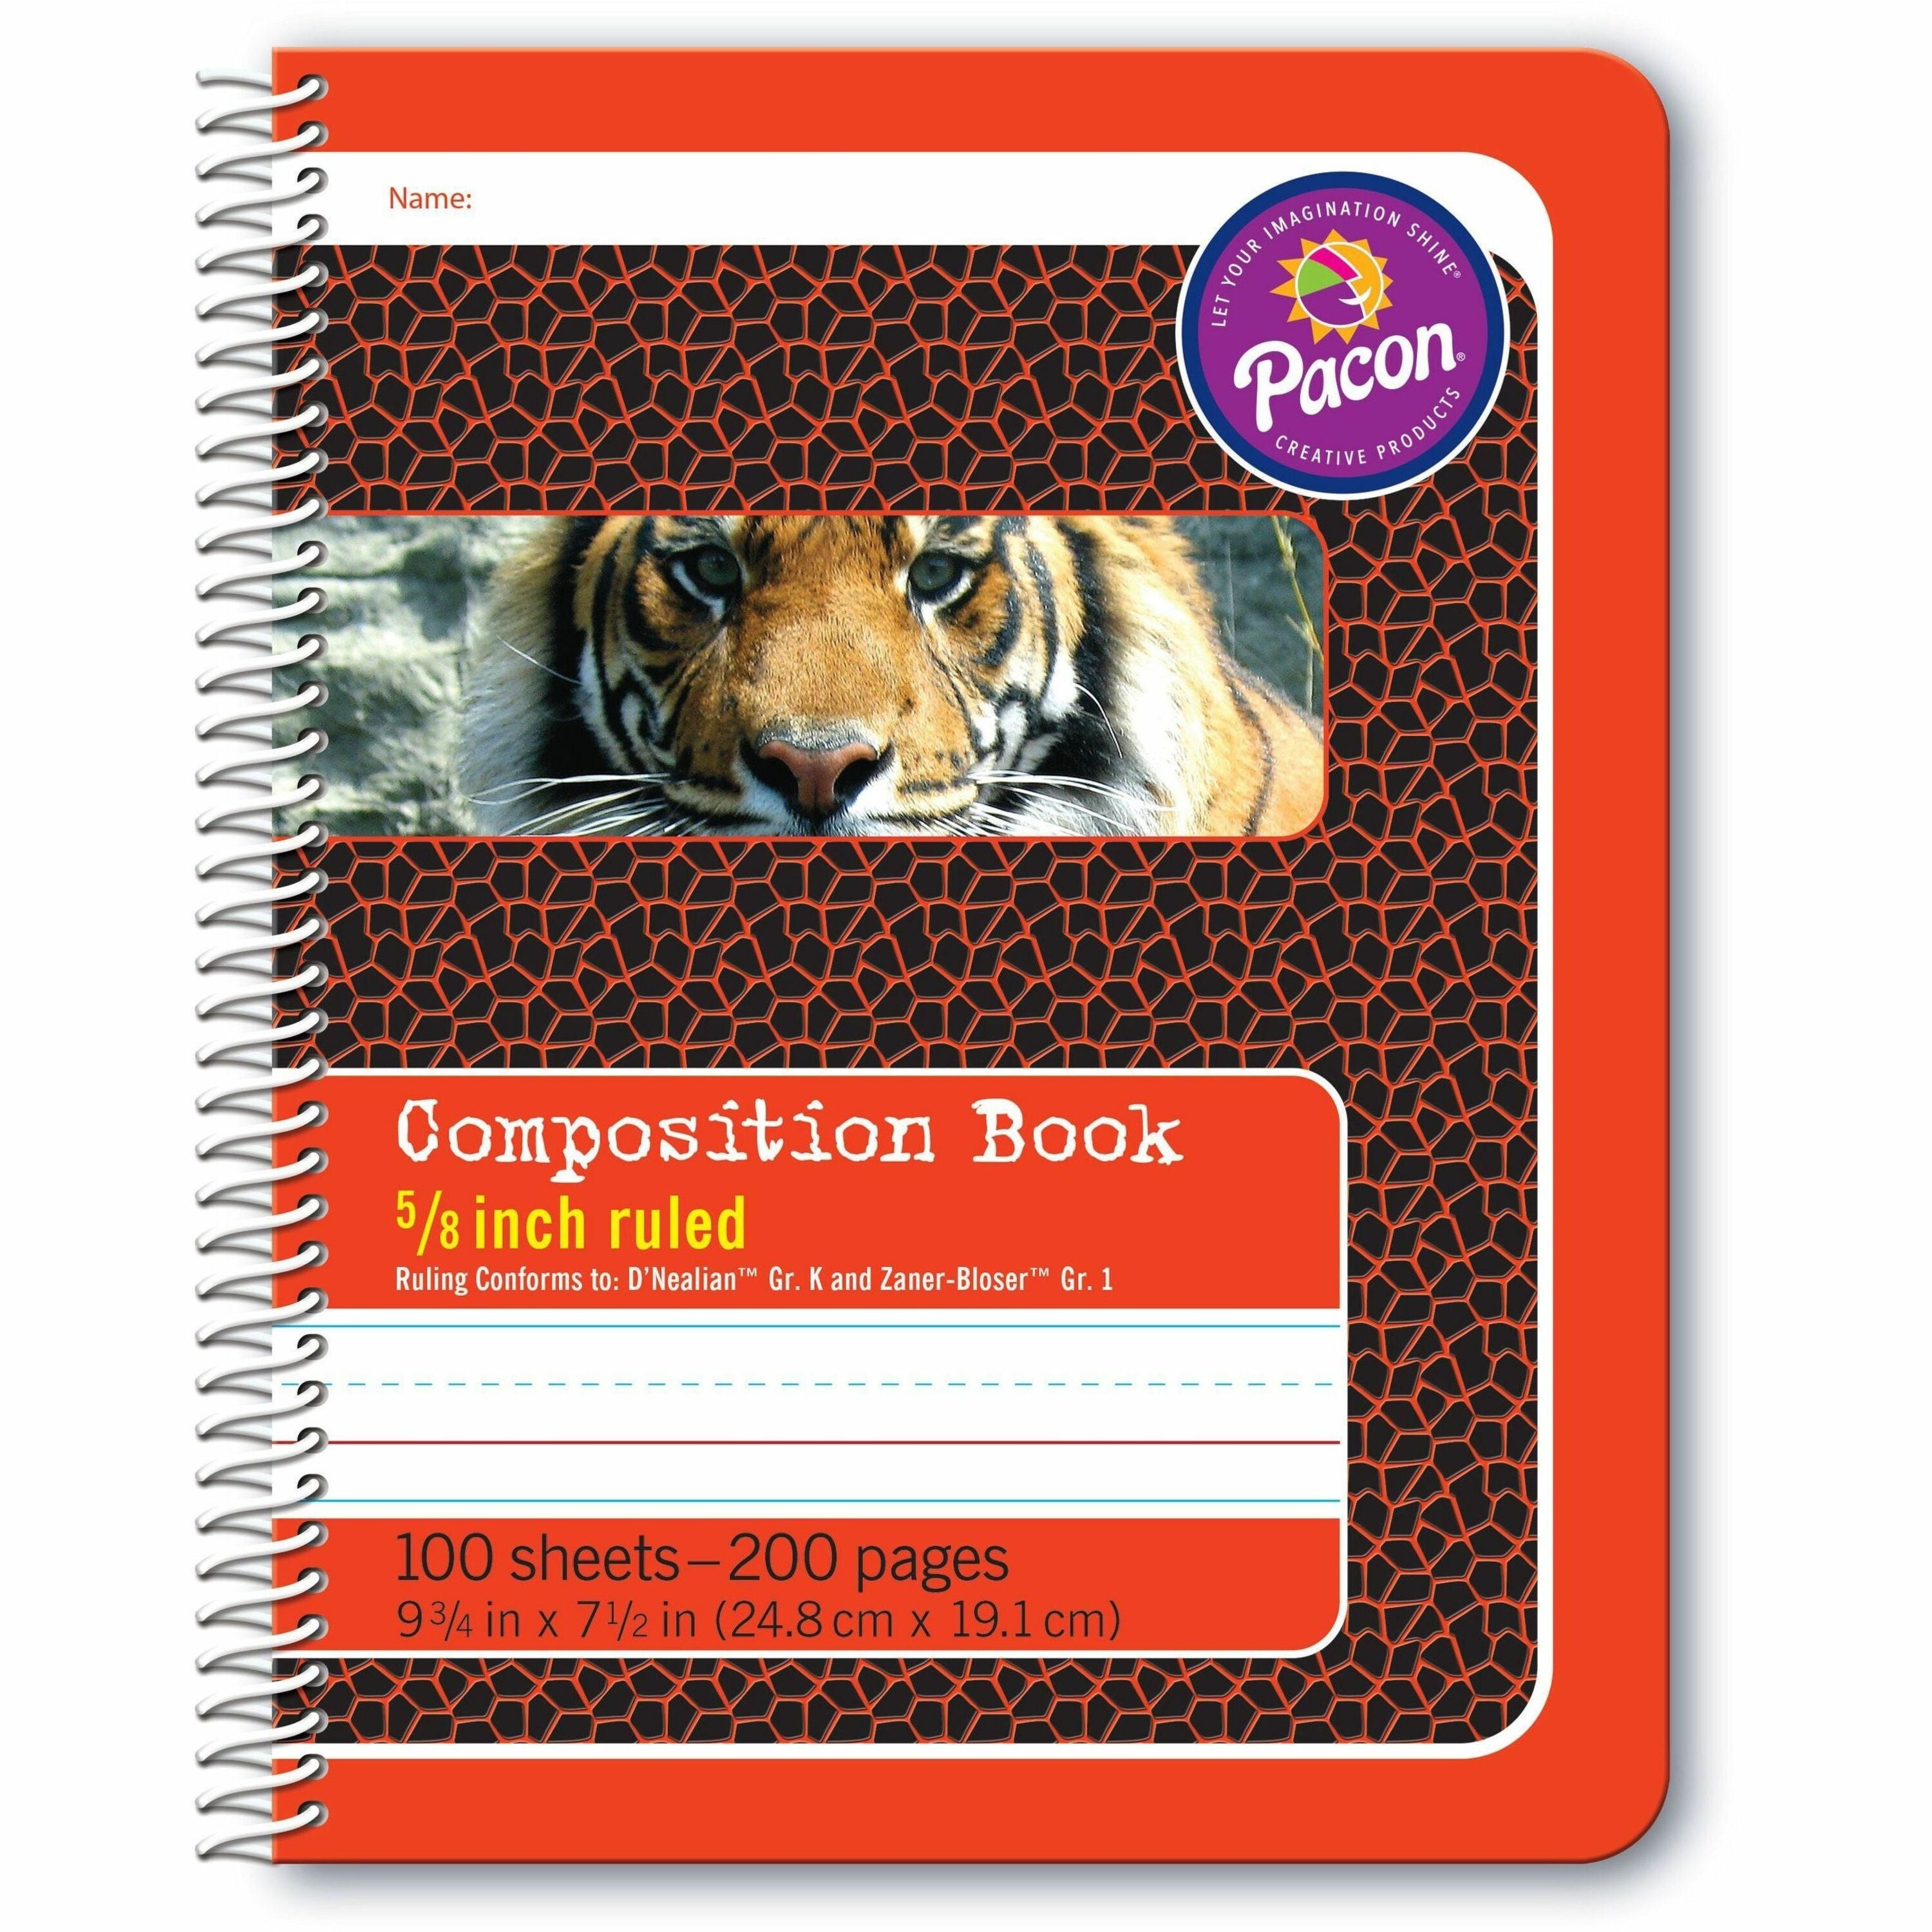 Pacon Composition Book - 100 Sheets - 200 Pages - Spiral Bound - Short Way Ruled - 0.63" Ruled - 4.50" Picture Story Space - 7 1/2" x 9 3/4" - Red Cover - Recycled - 1 Each - 